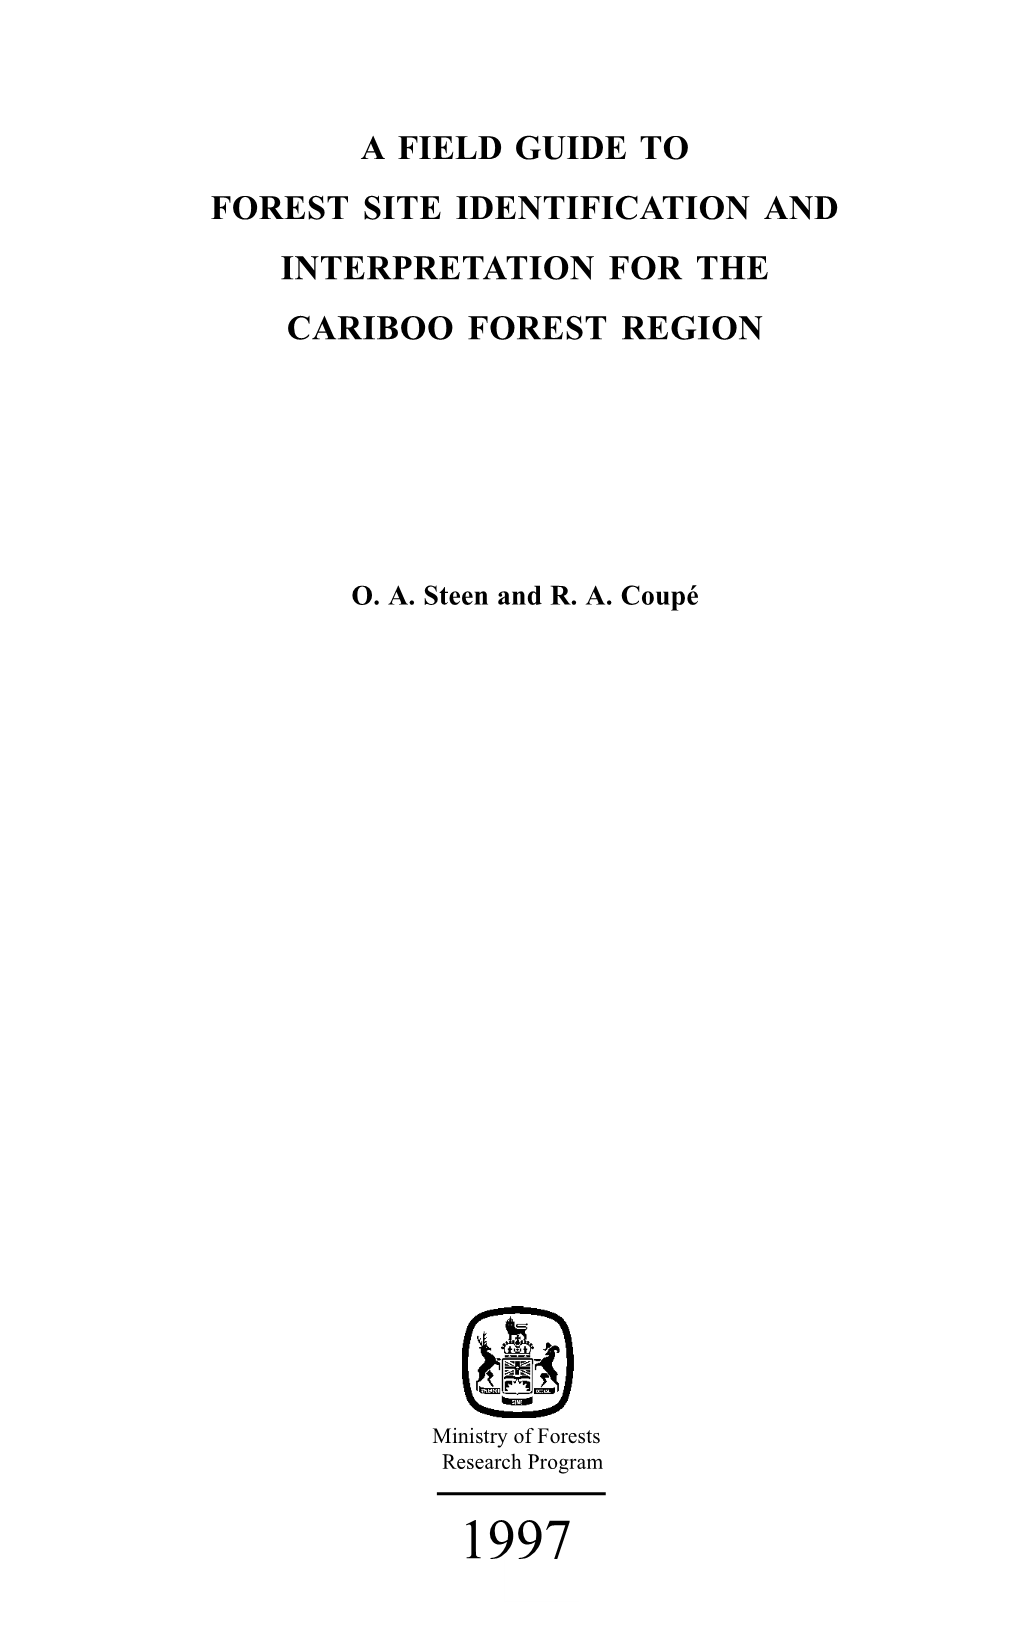 A Field Guide to Forest Site Identification and Interpretation for the Cariboo Forest Region